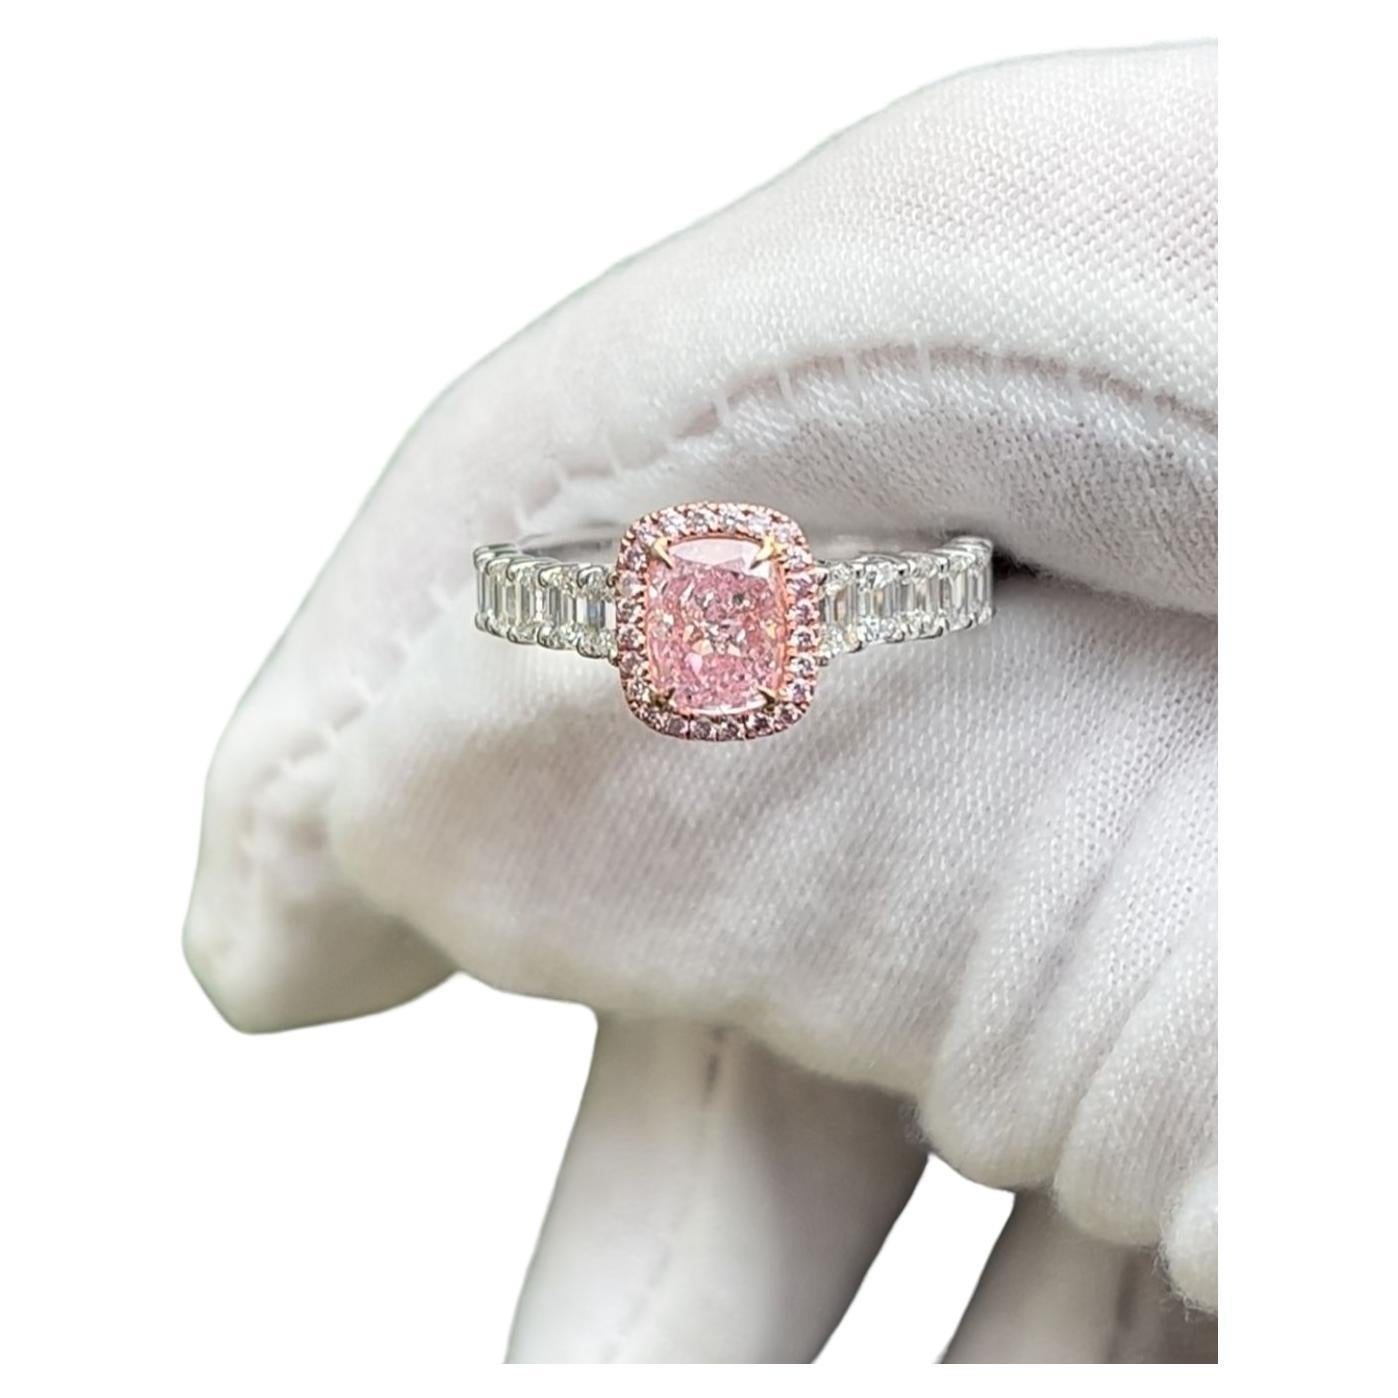 Very Light Pink Diamond Ring 1.03 Ct Type 2a GIA Long Cushion with Emeralds 18K For Sale